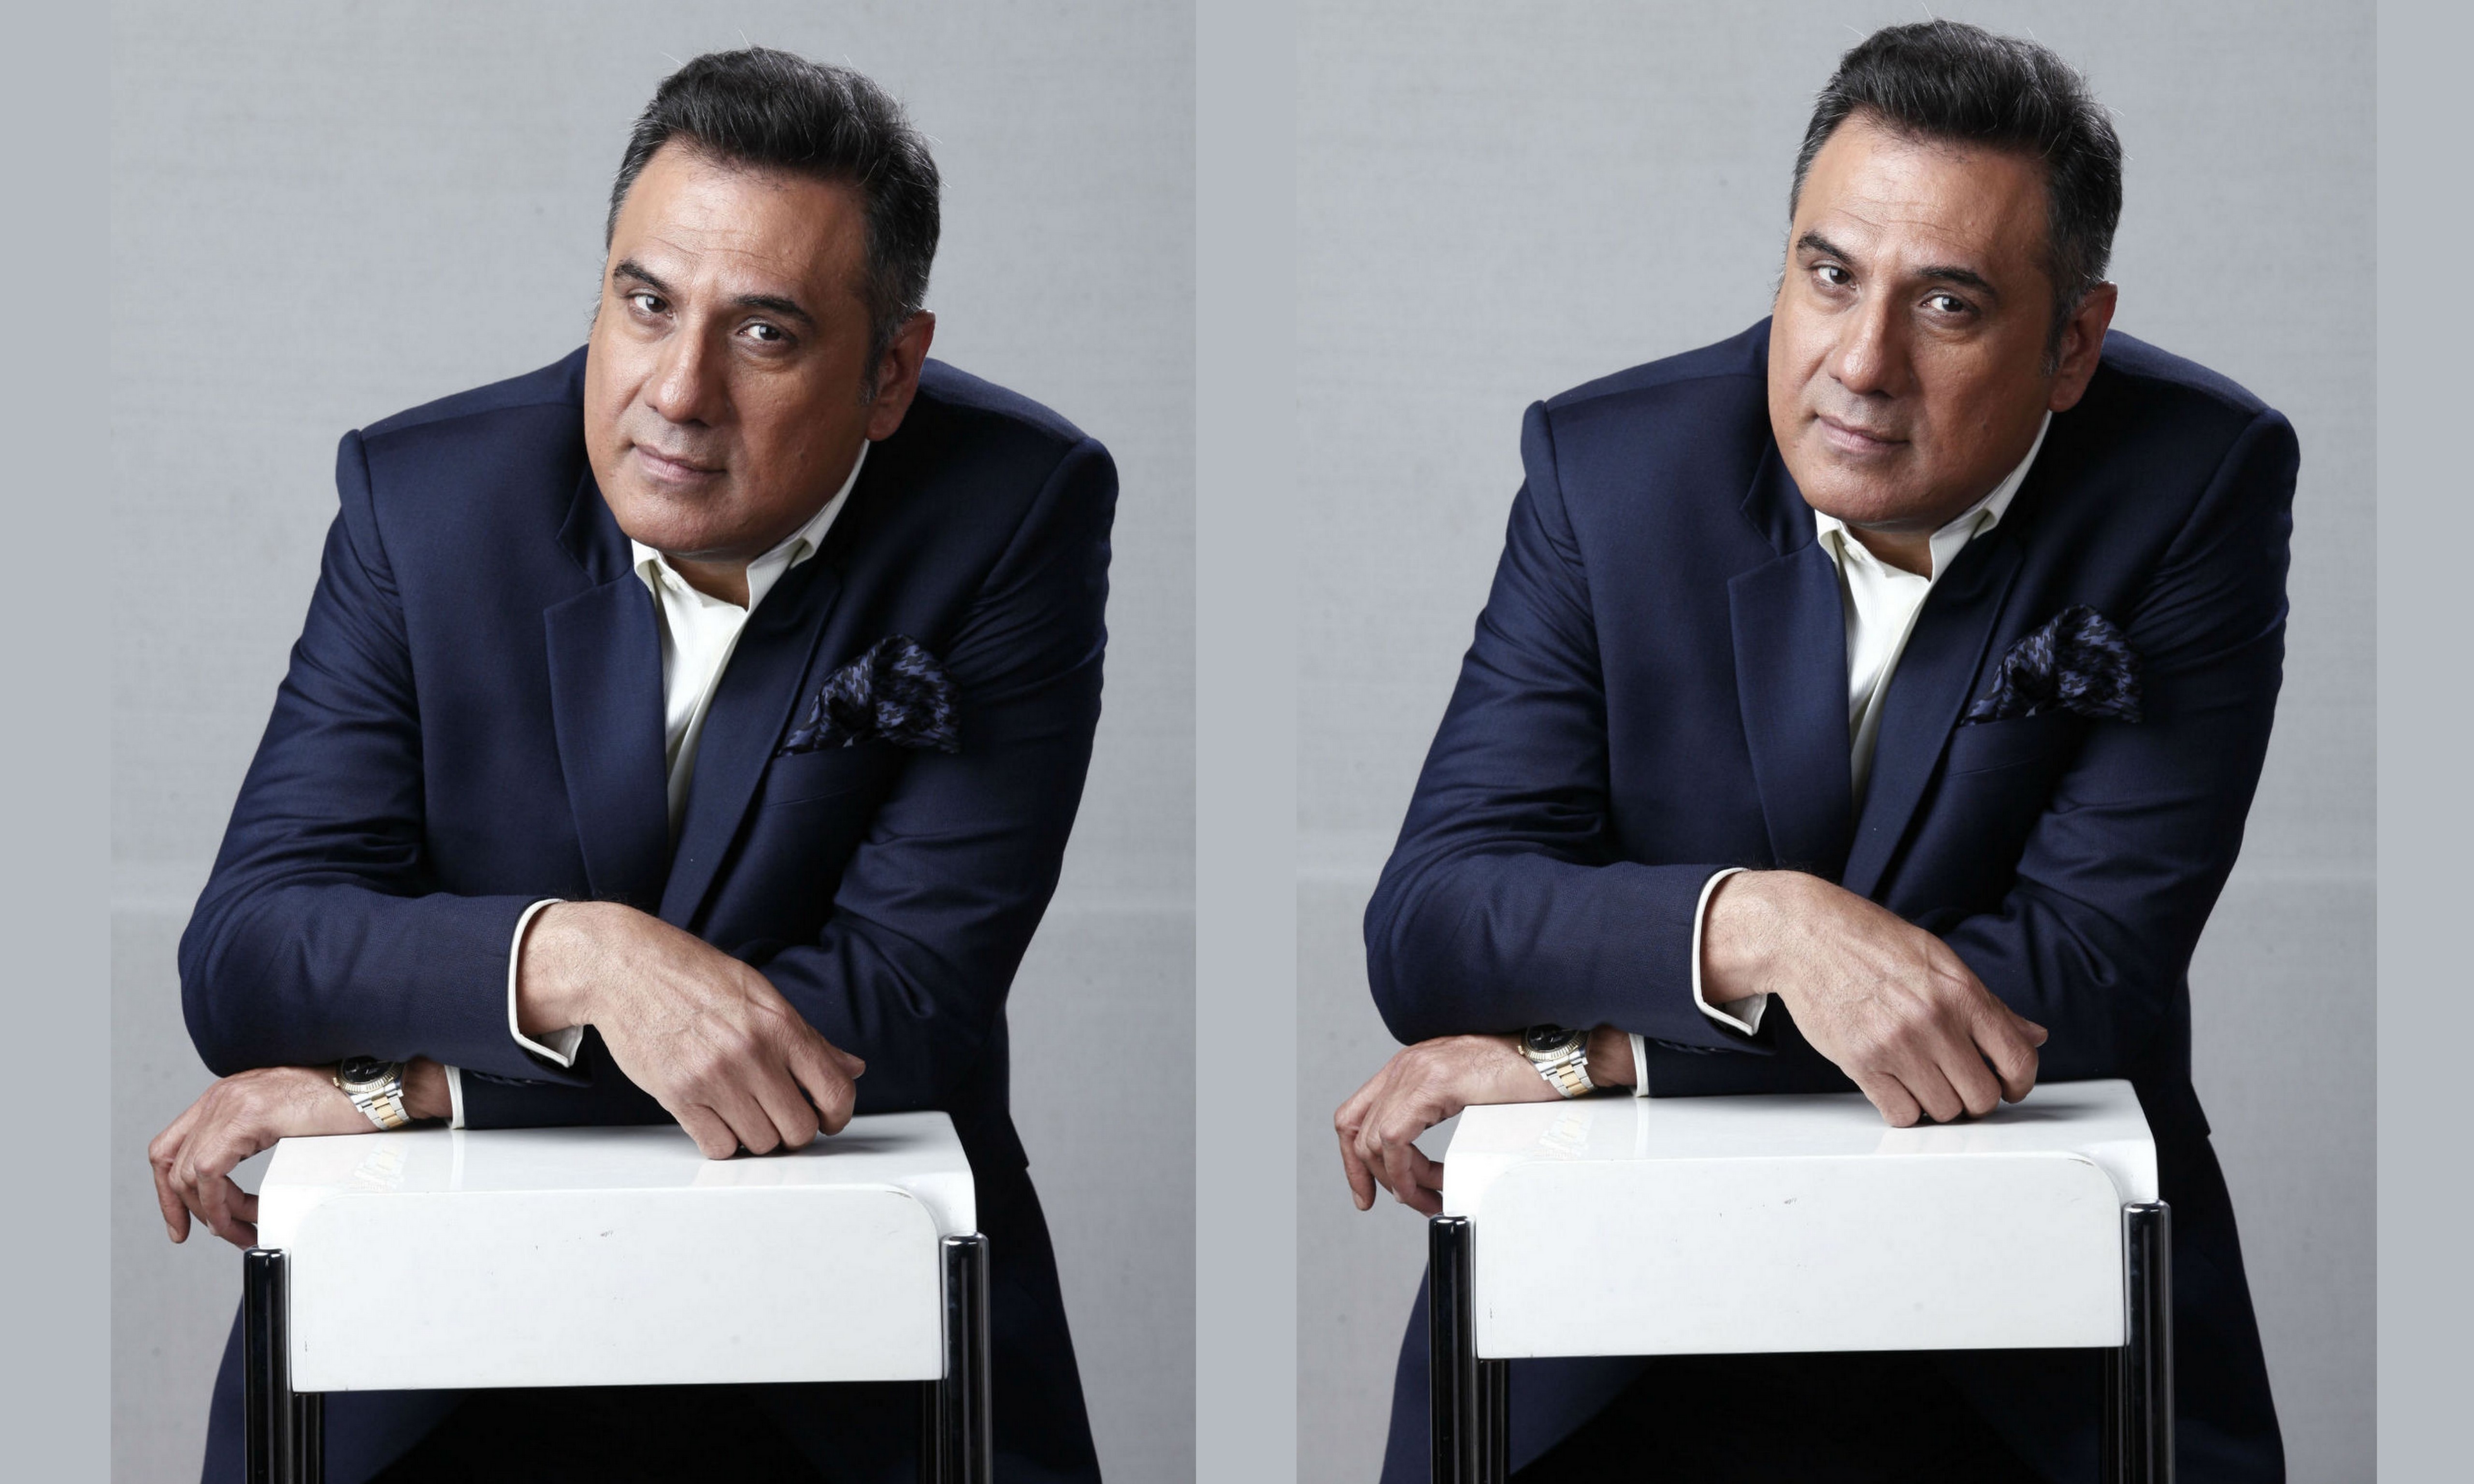 Boman Irani says that along with joy and sorrows he shares his household responsibilities too with his wife Zenobia Irani.